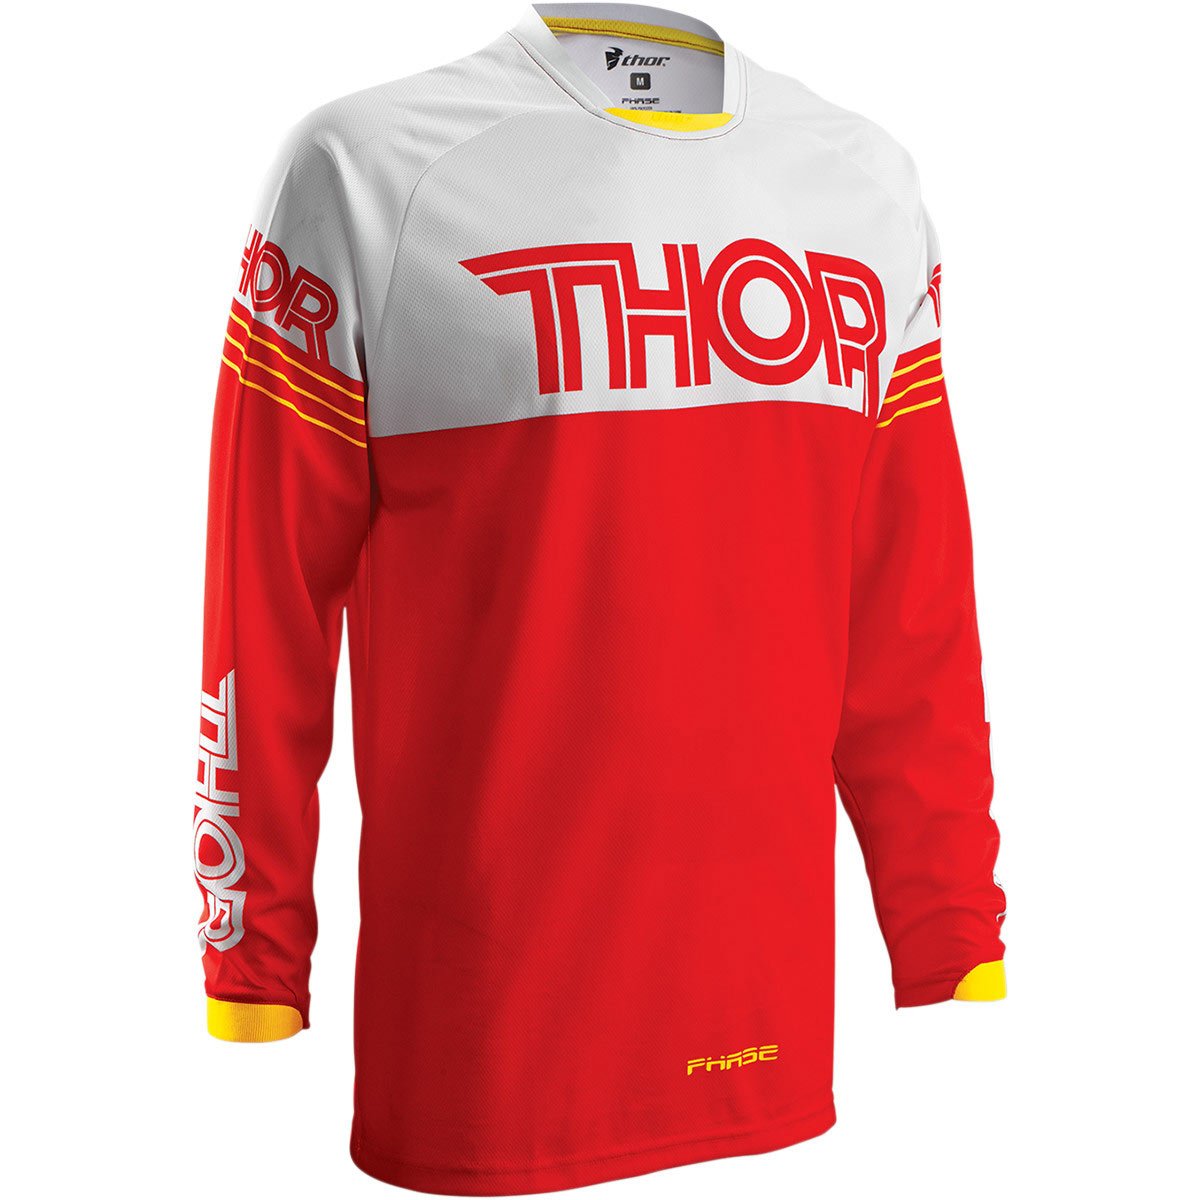 MC Auto: Thor Phase Hyper Red Jersey